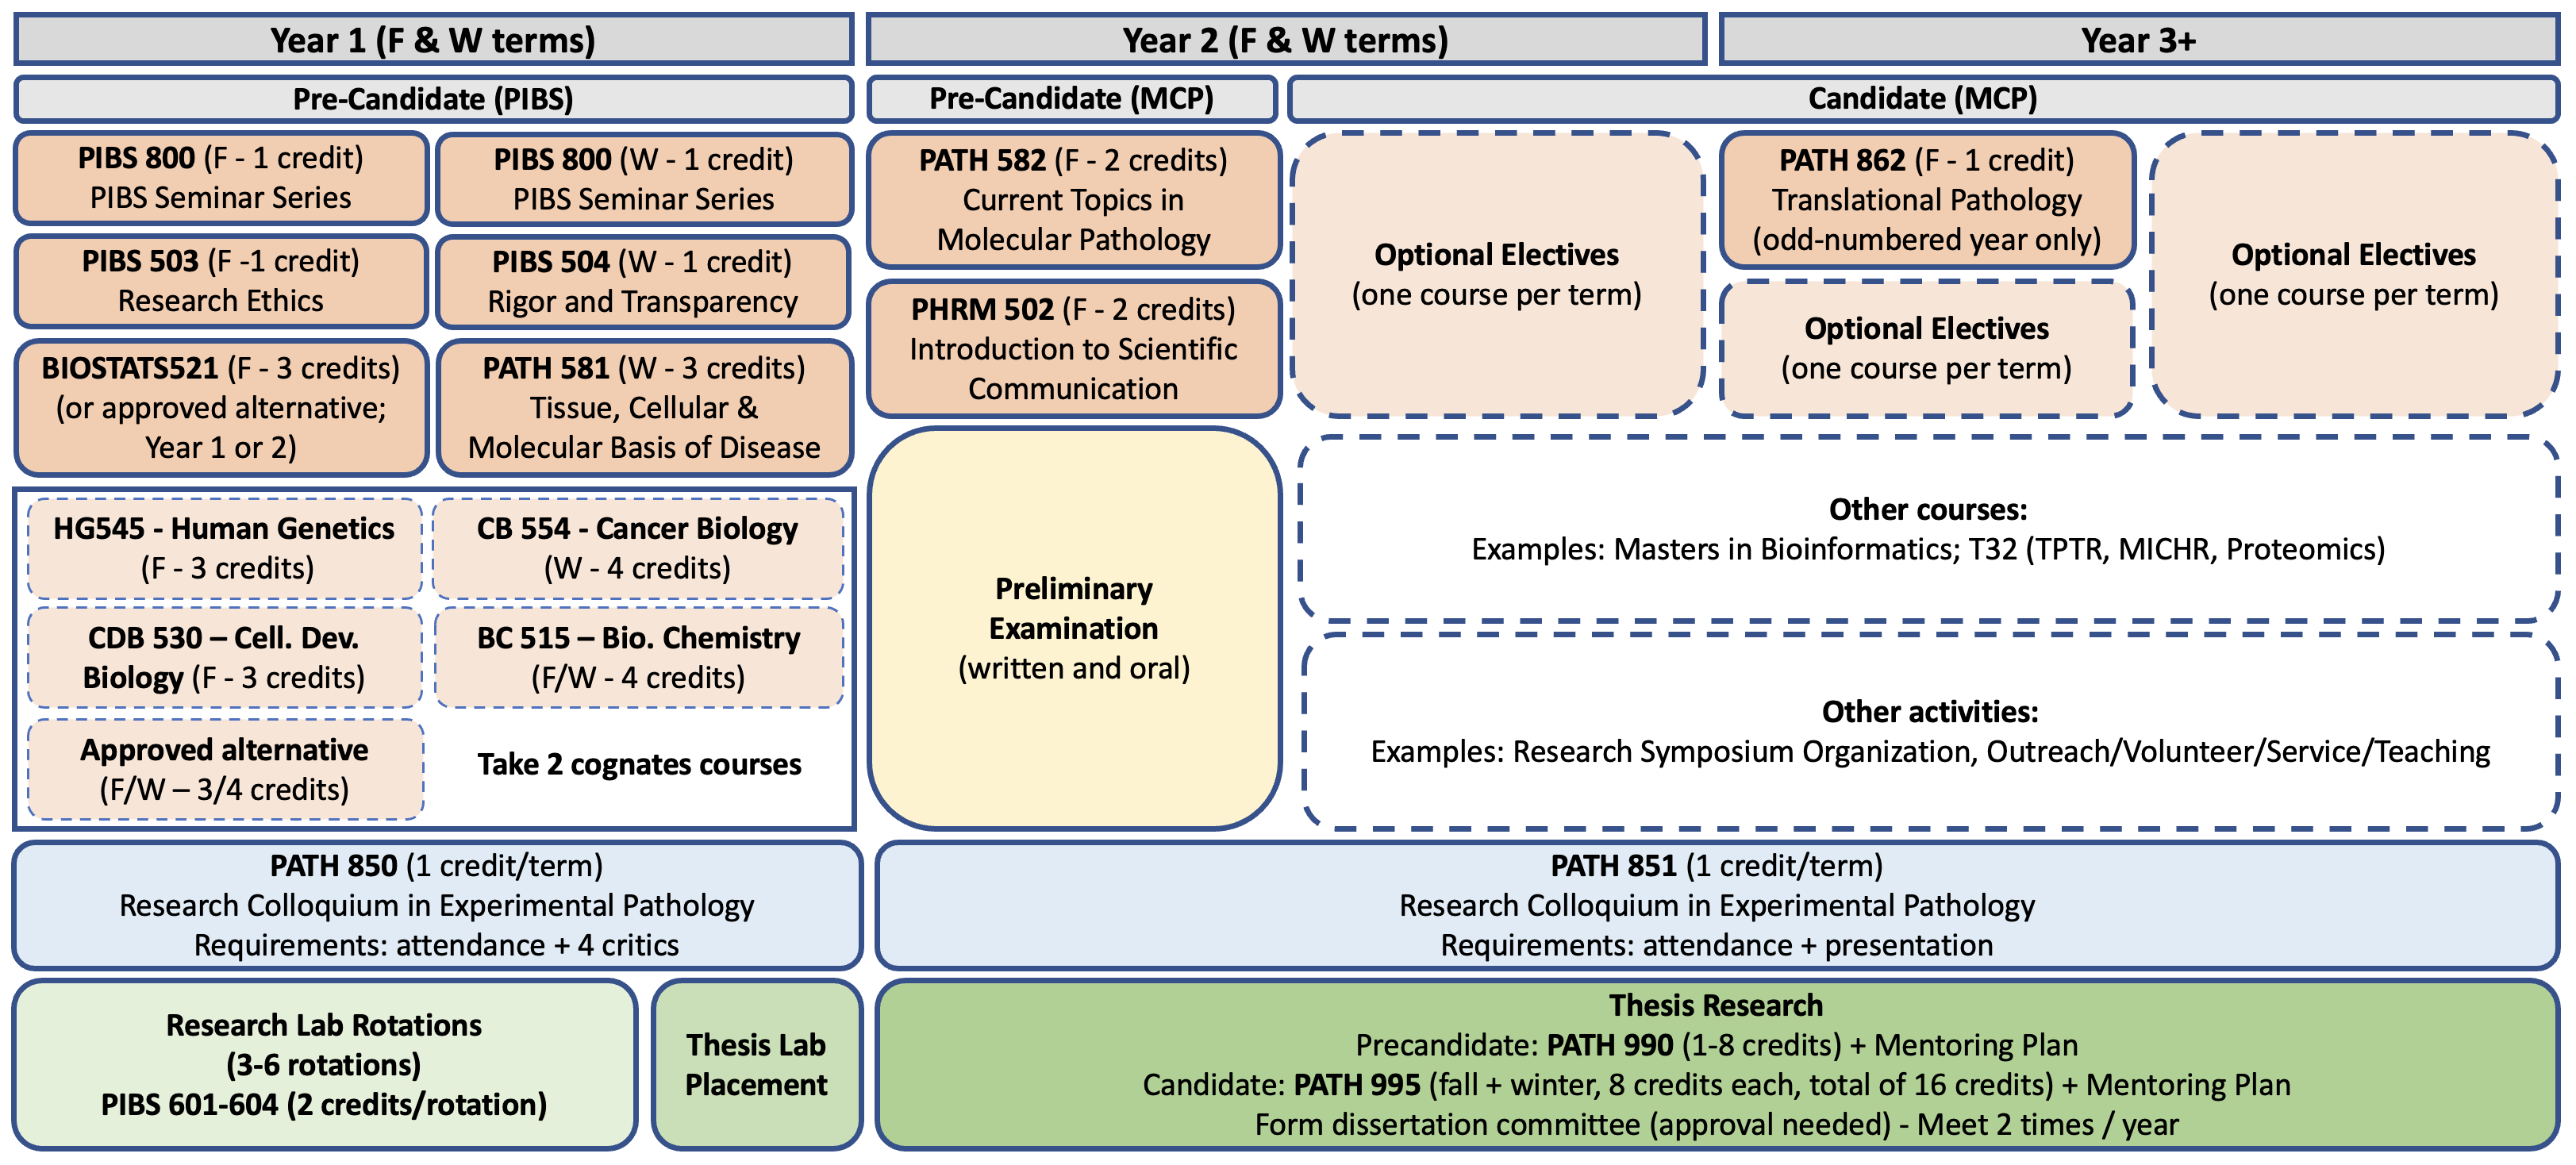 Overview of the MCP Curriculum.